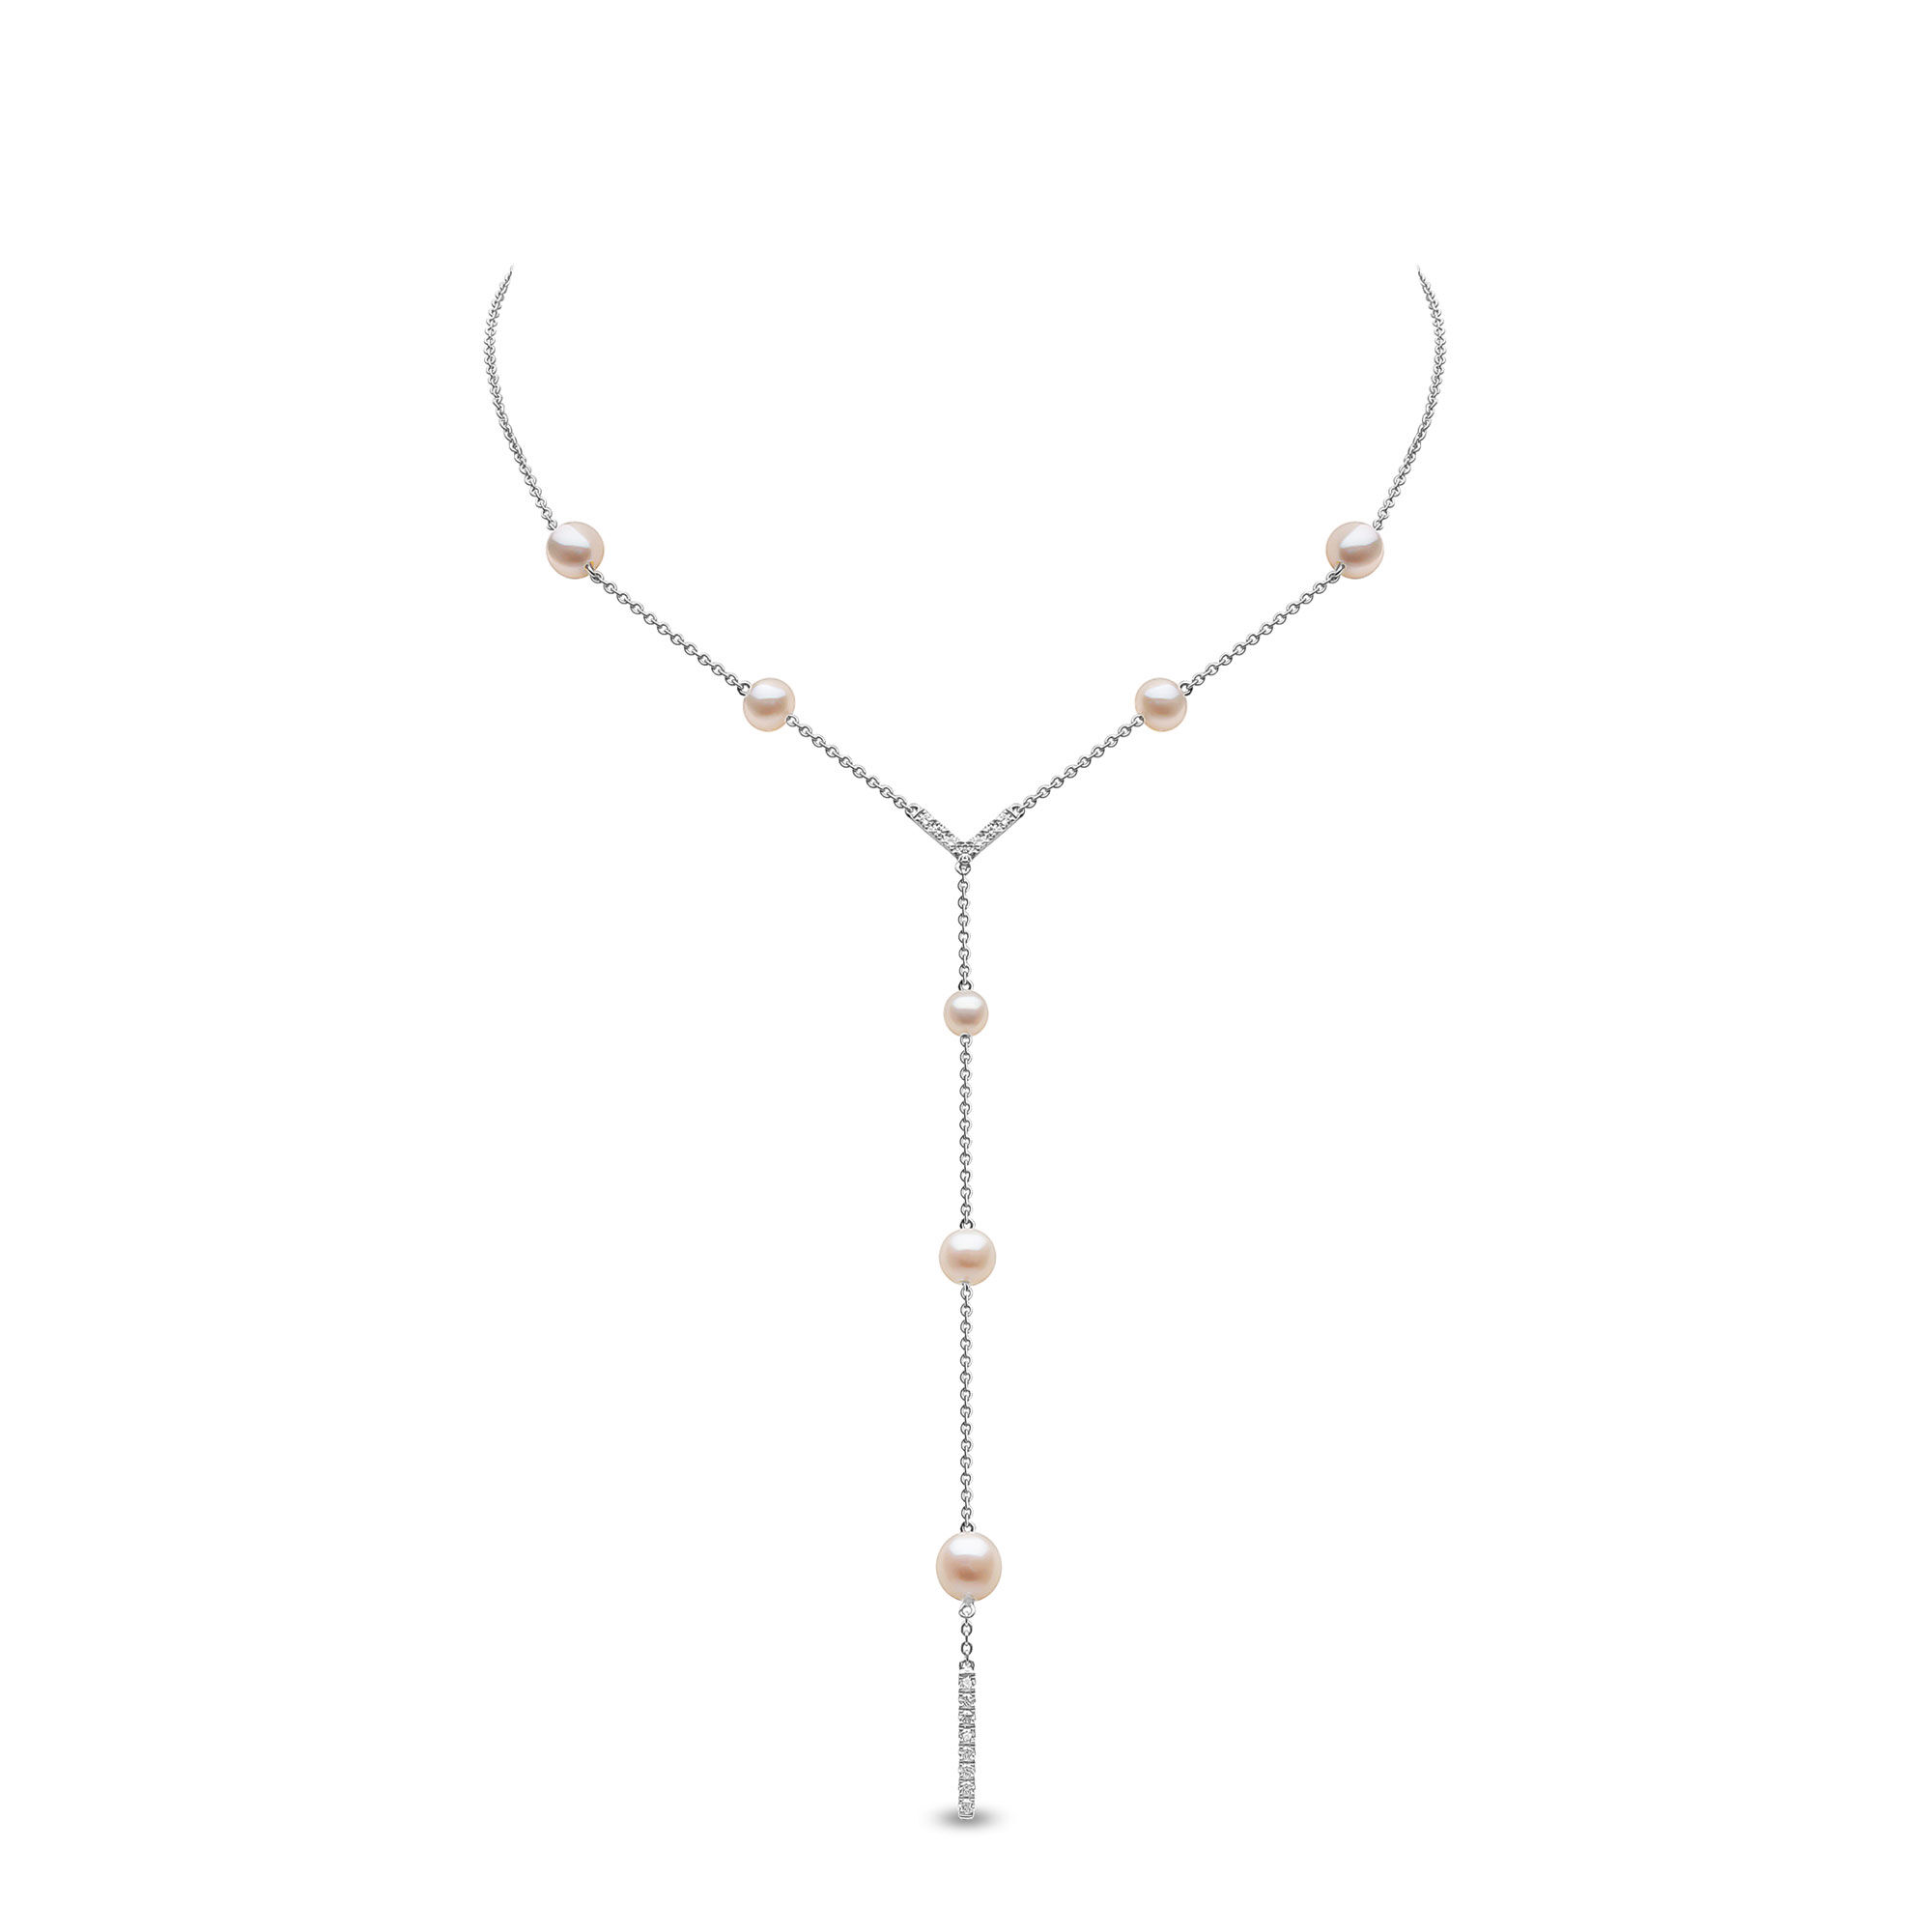 Trend White Gold Pearl and Diamond Necklace | Yoko London 